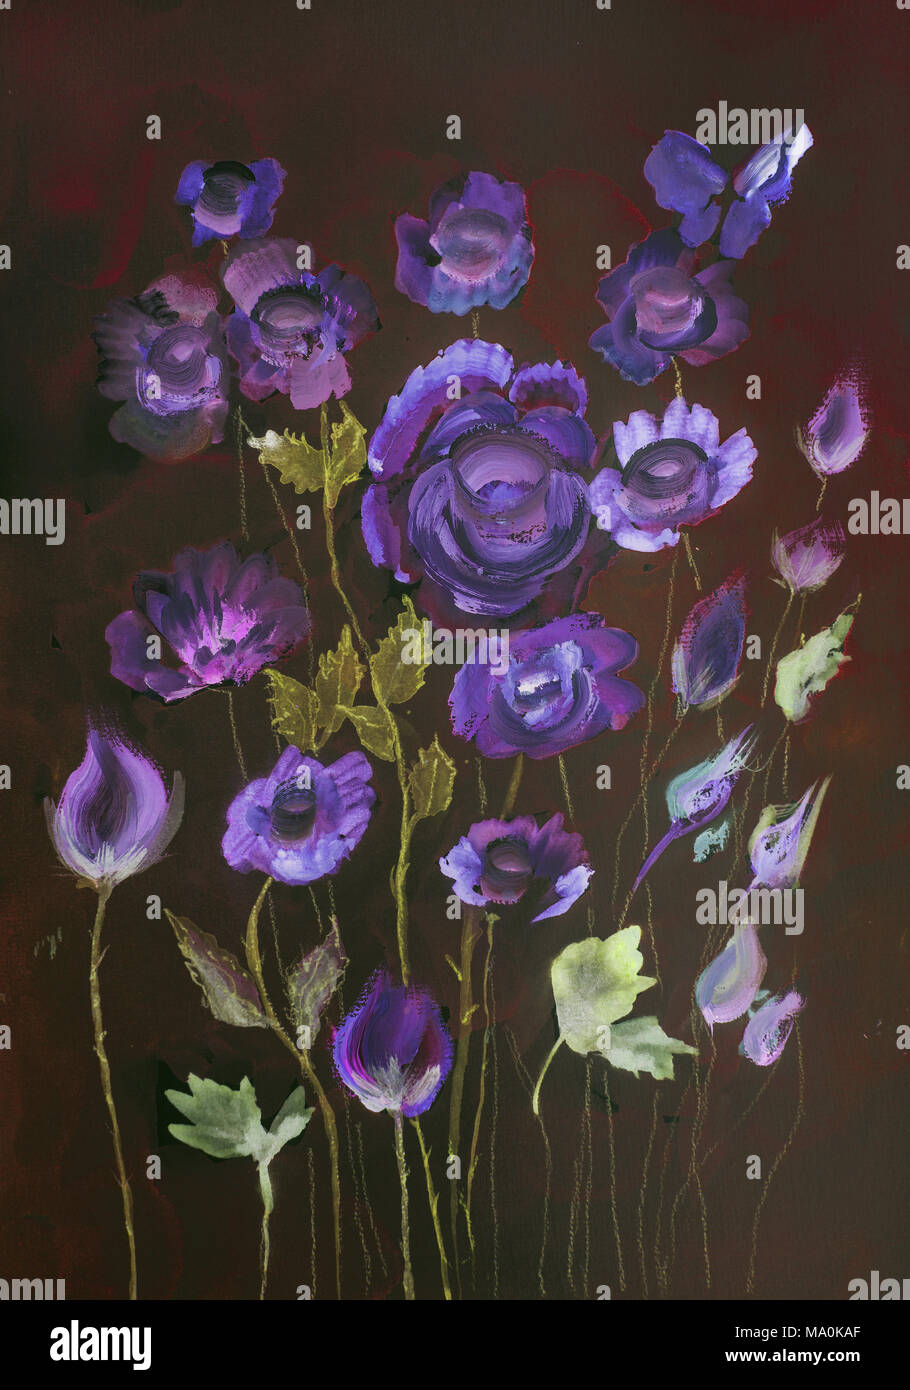 Purple roses on a wine red background. The dabbing technique near the edges gives a soft focus effect due to the altered surface roughness of the pape Stock Photo